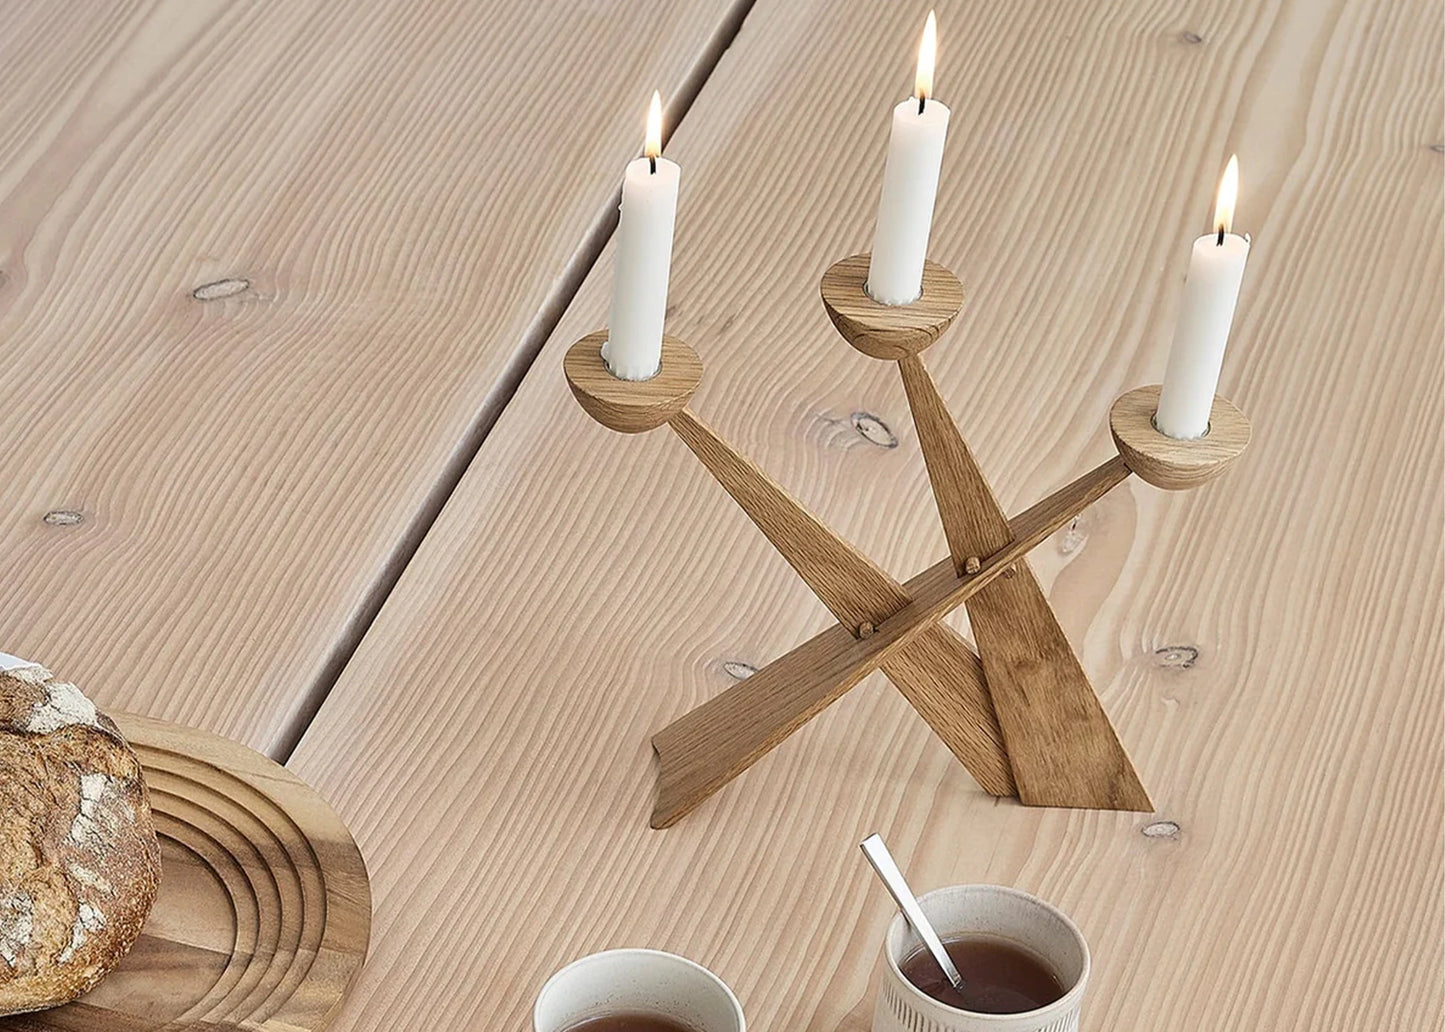 Caravel Oak Candlestick Holder with lit candles on a wooden table surrounded by bread and coffee